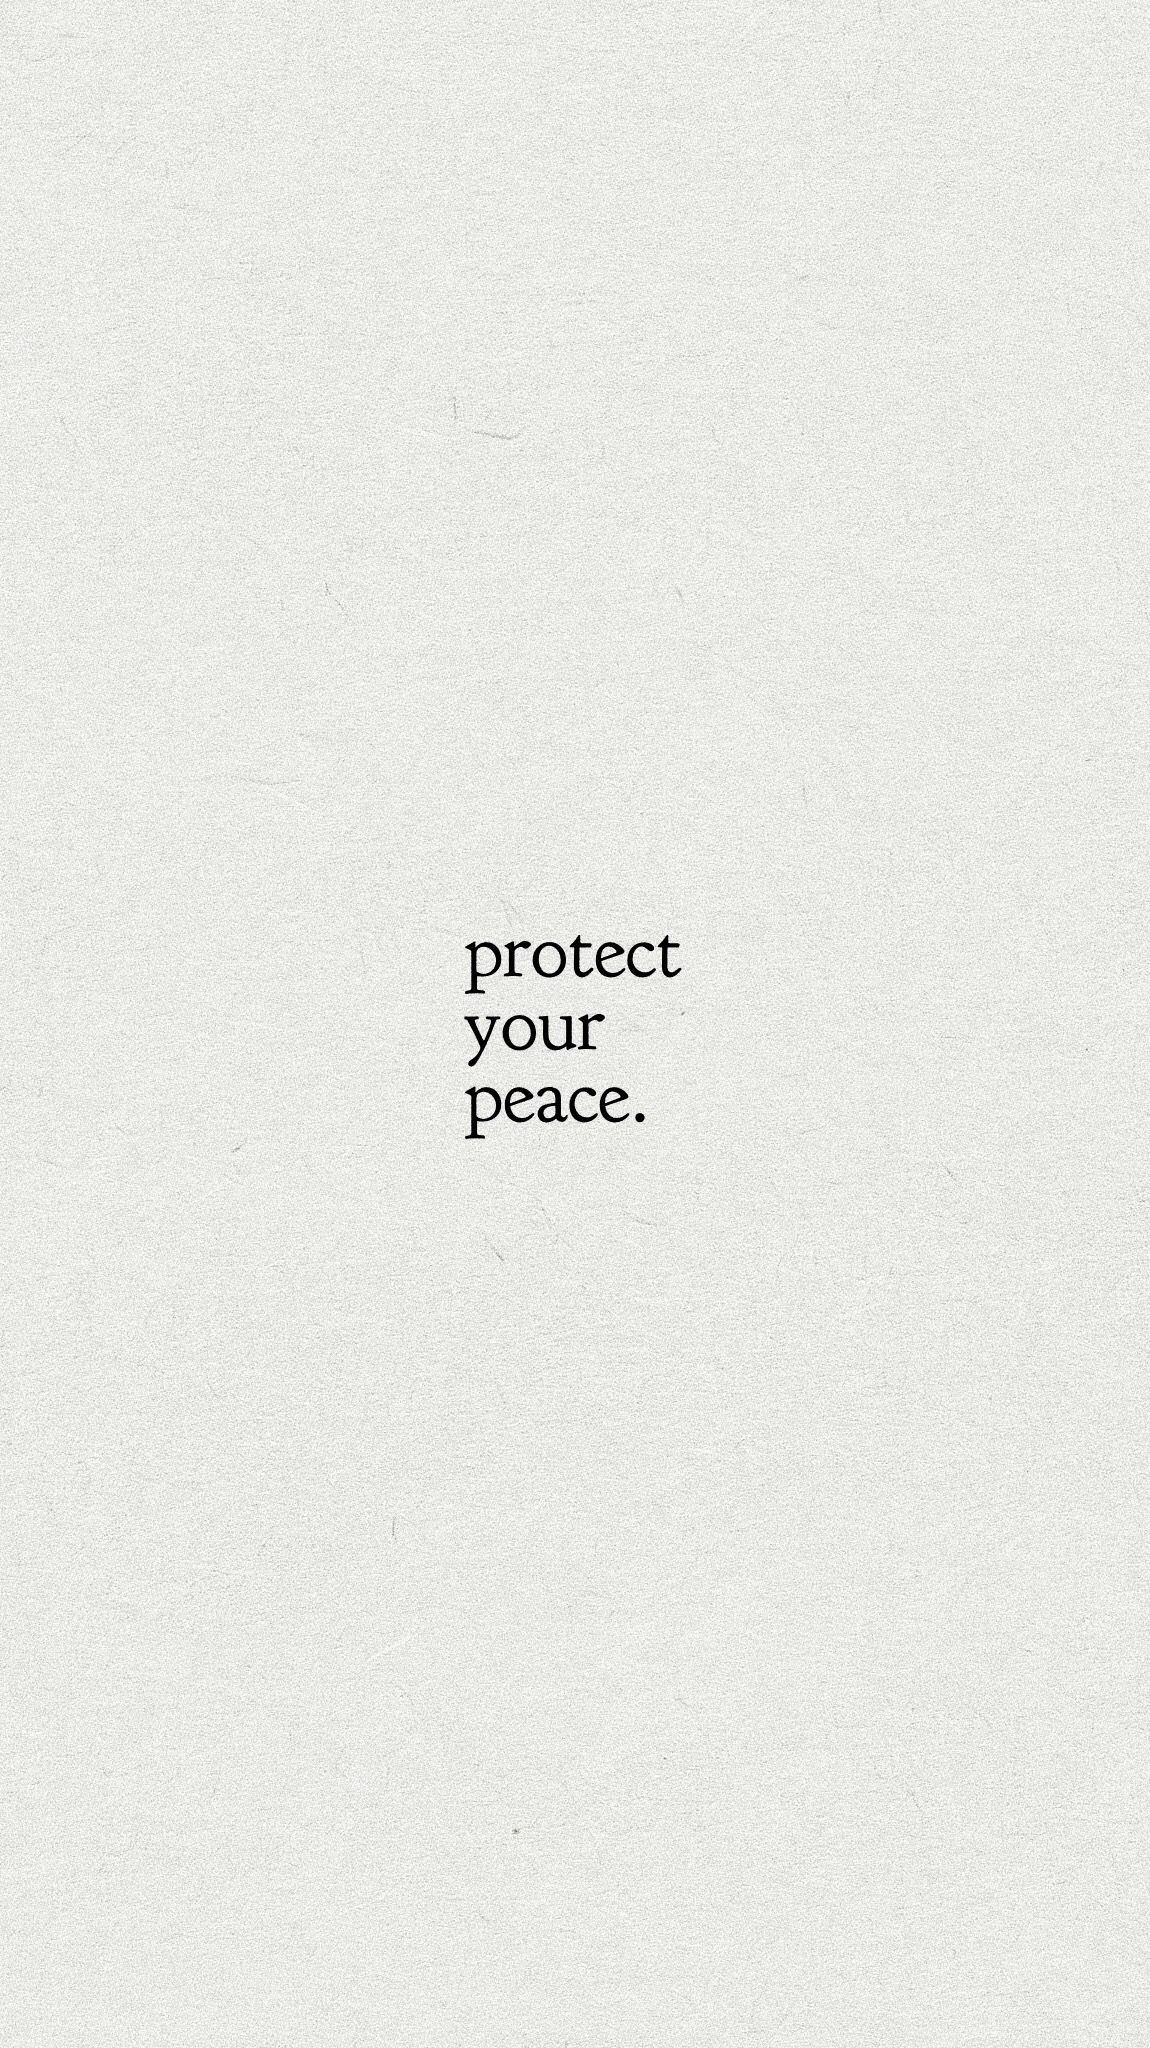 Protect your peace quote phone wallpaper. Peace quotes, Words quotes, Inspirational quotes